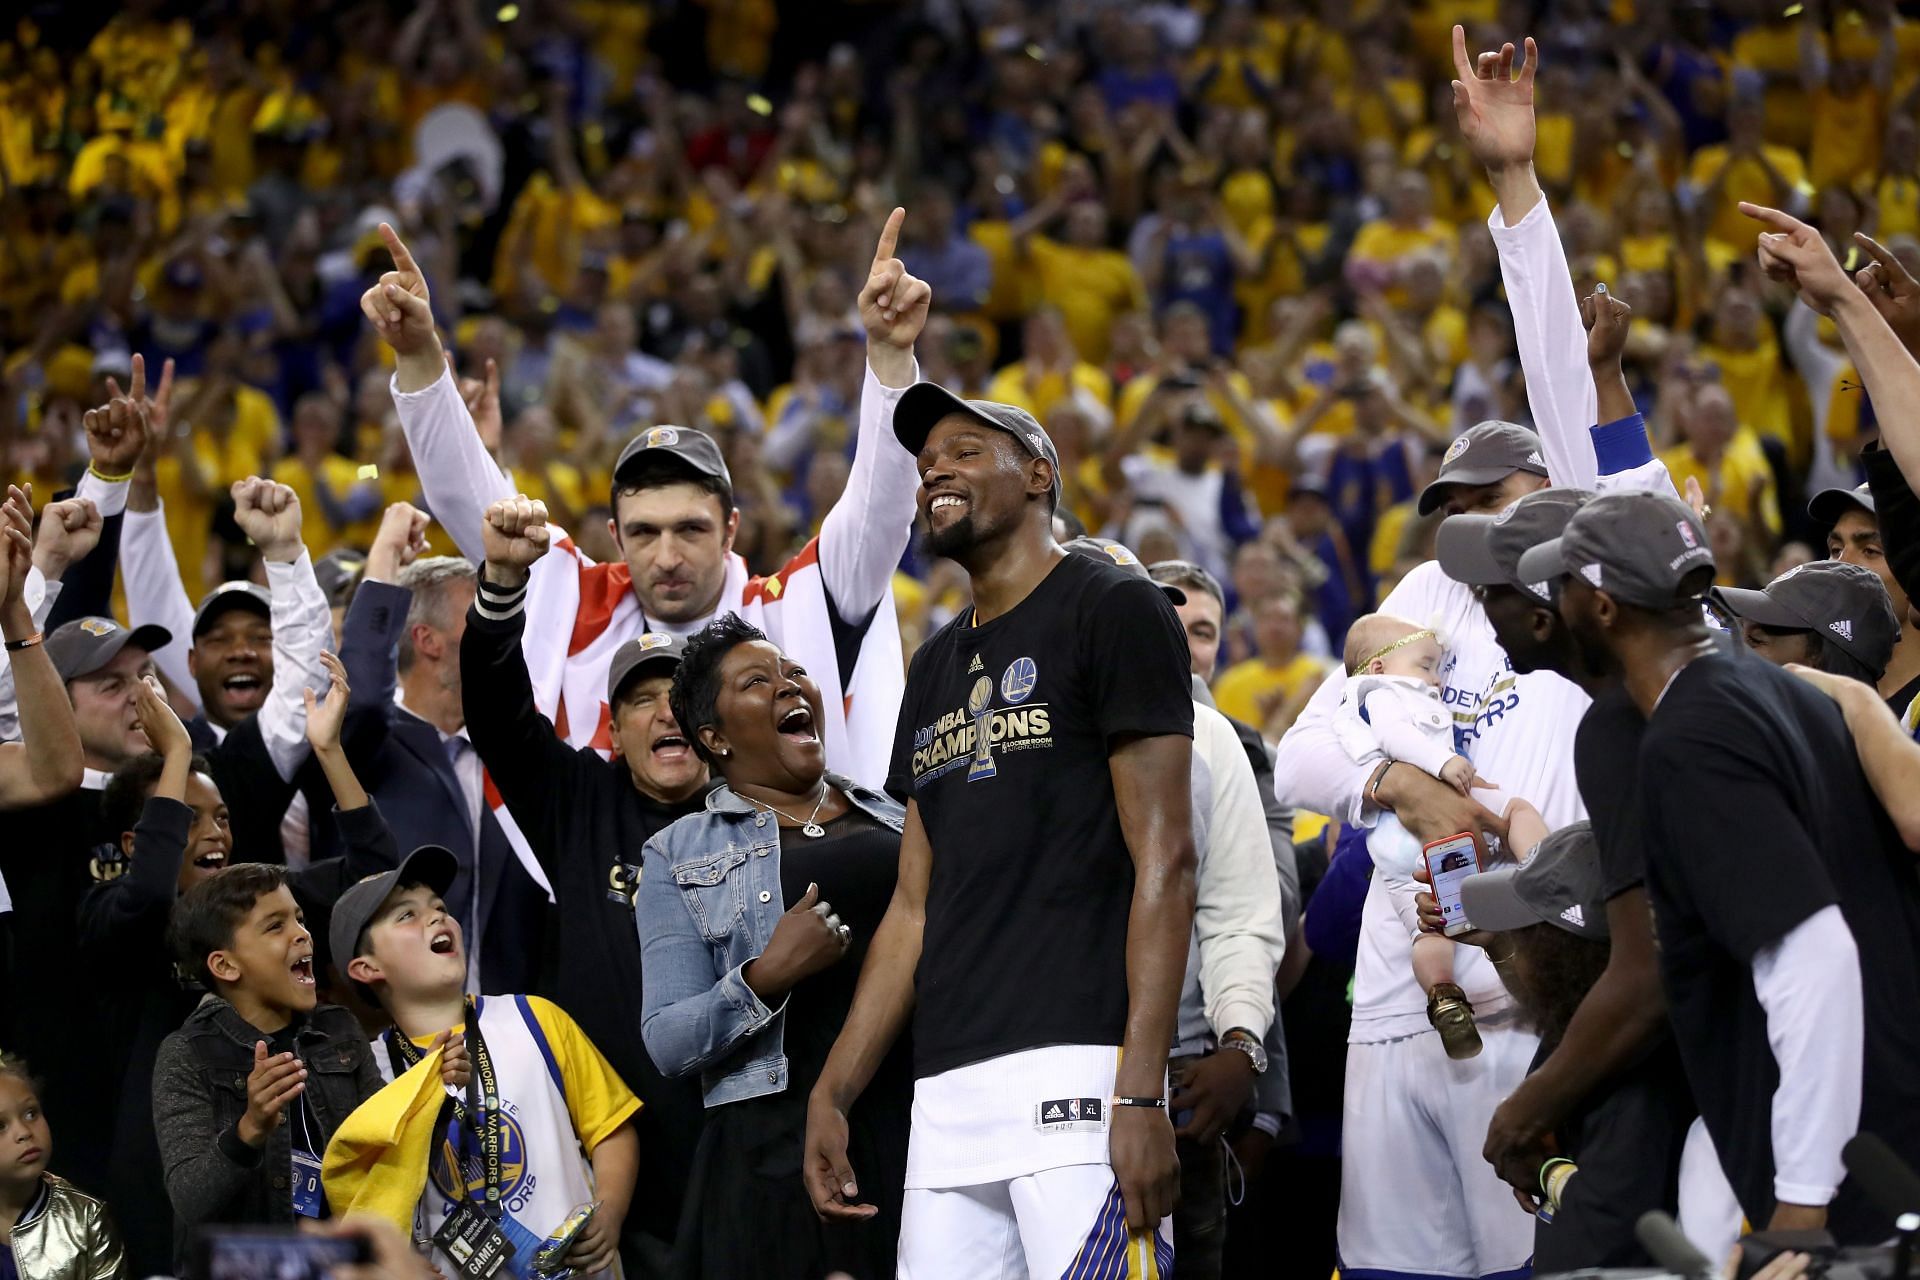 NBA title-contending teams need to have great chemistry to succeed.